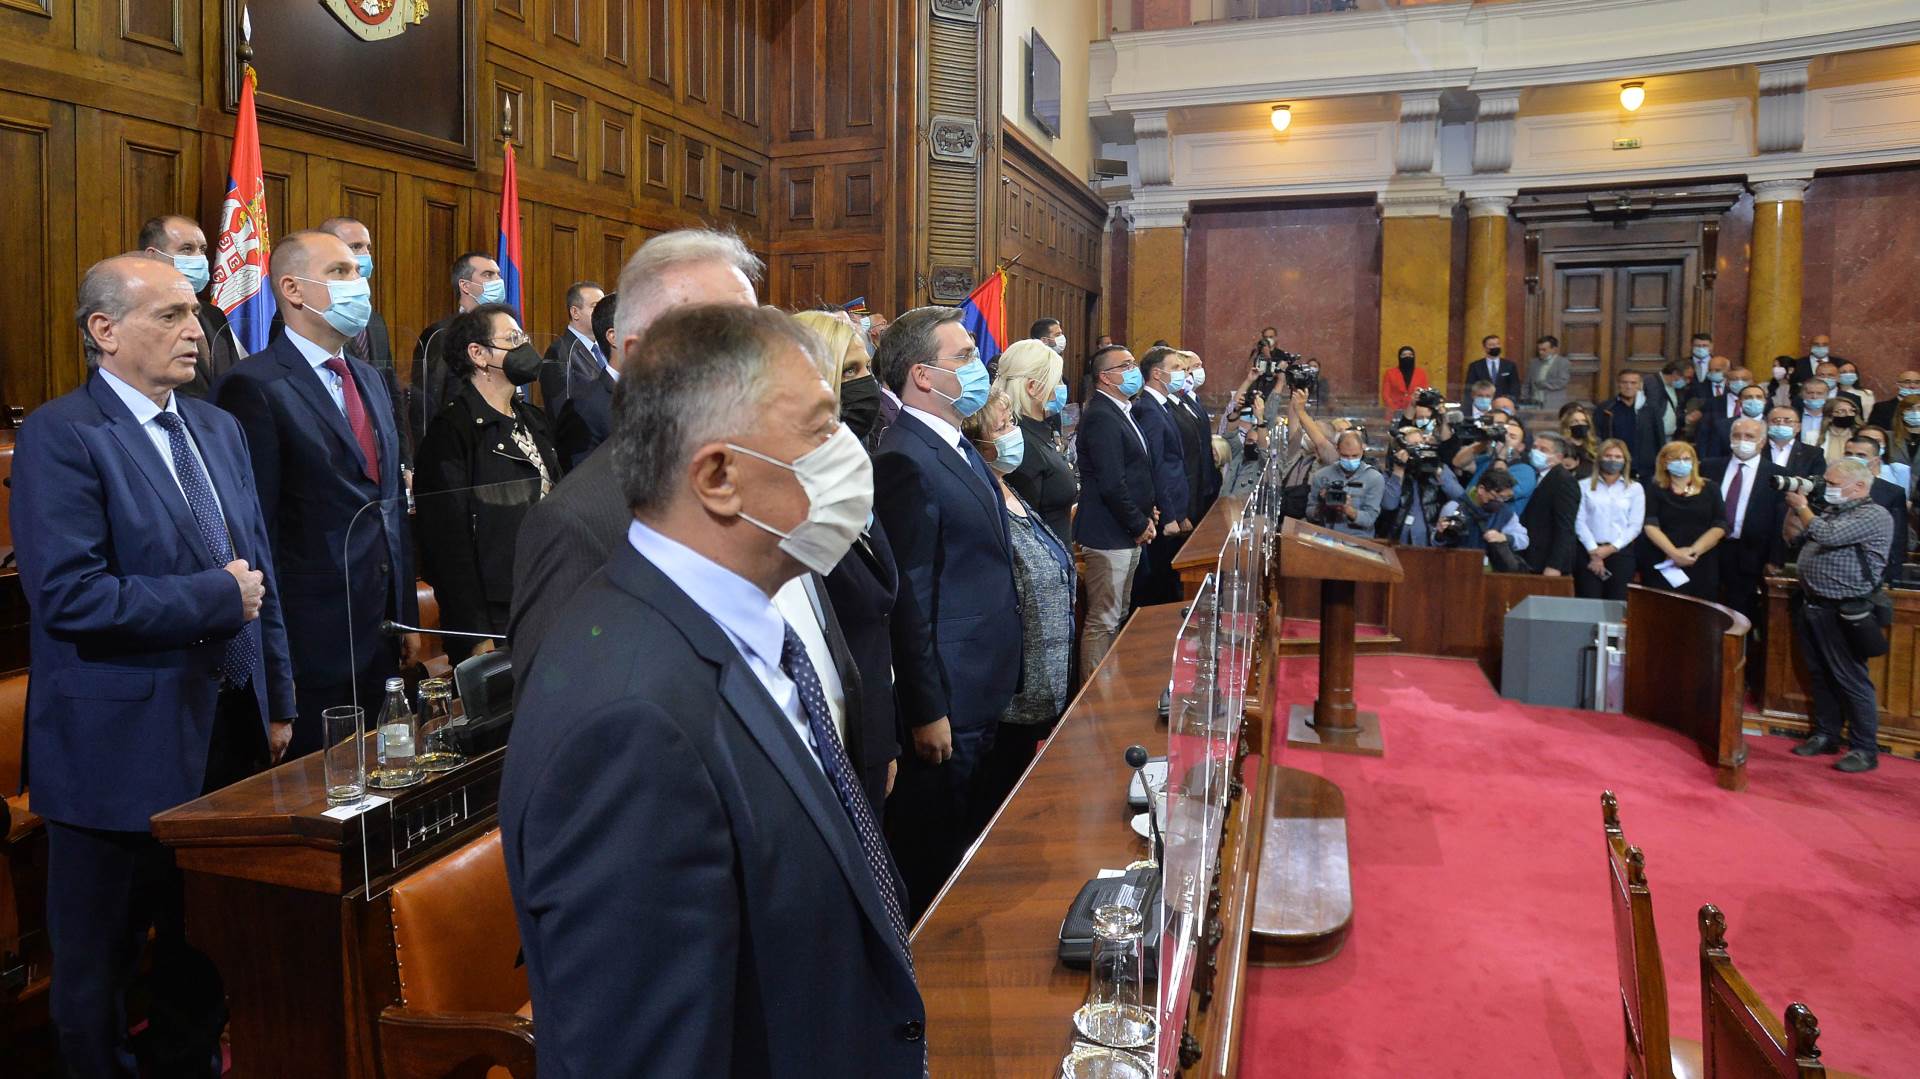 Swearing-in the new government of Serbia